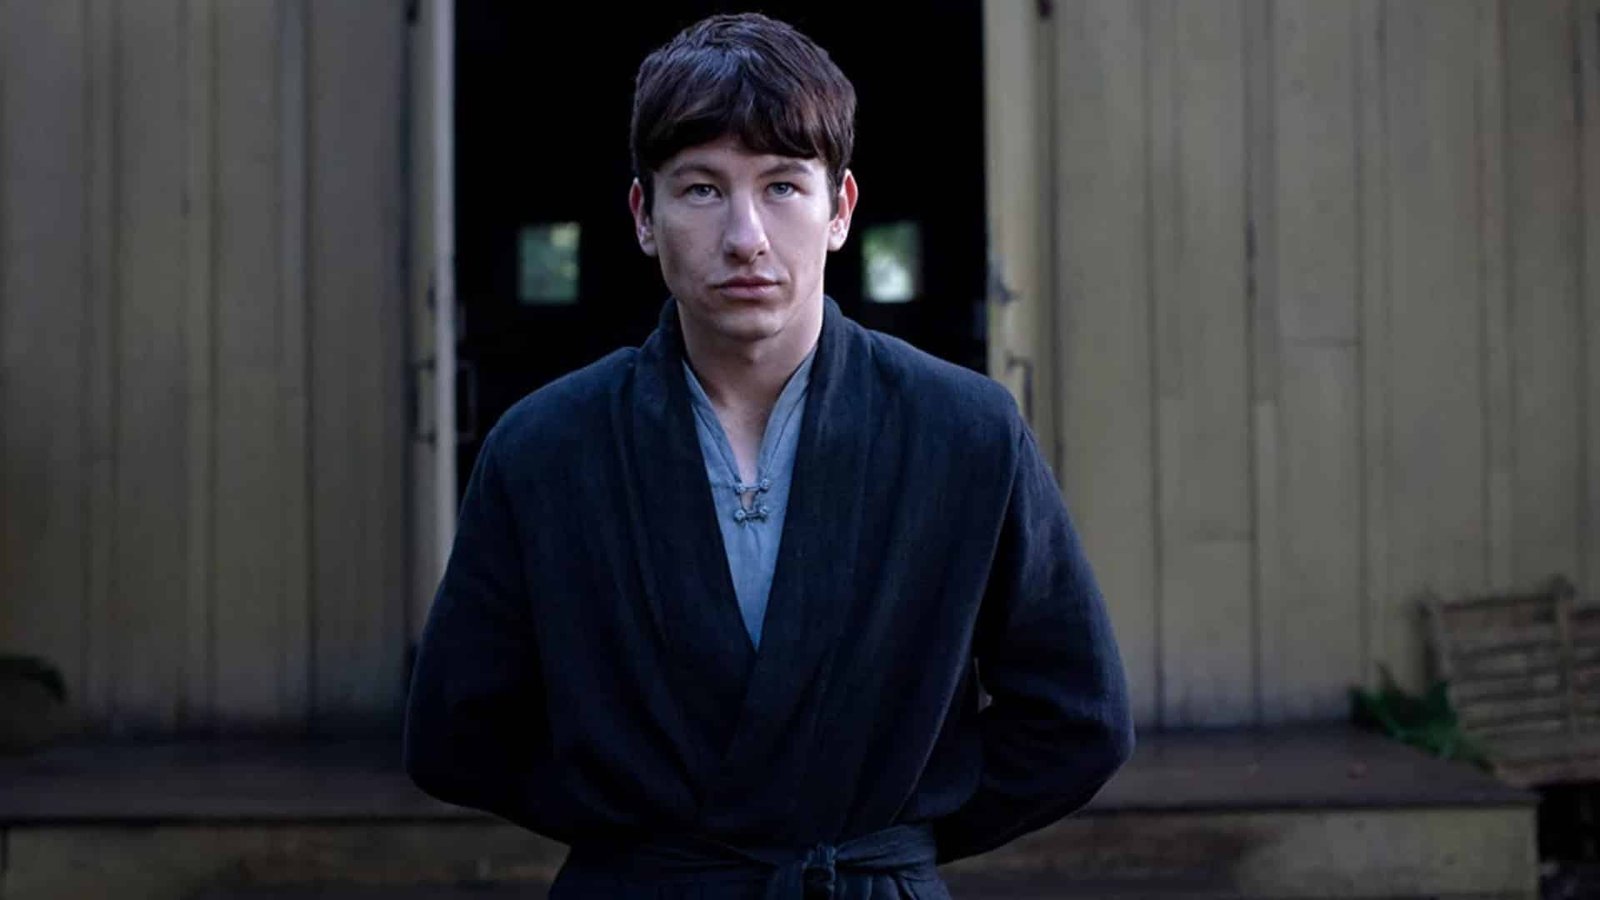 Barry Keoghan will be playing Officer Stanley Merkel in The Batman (2022)